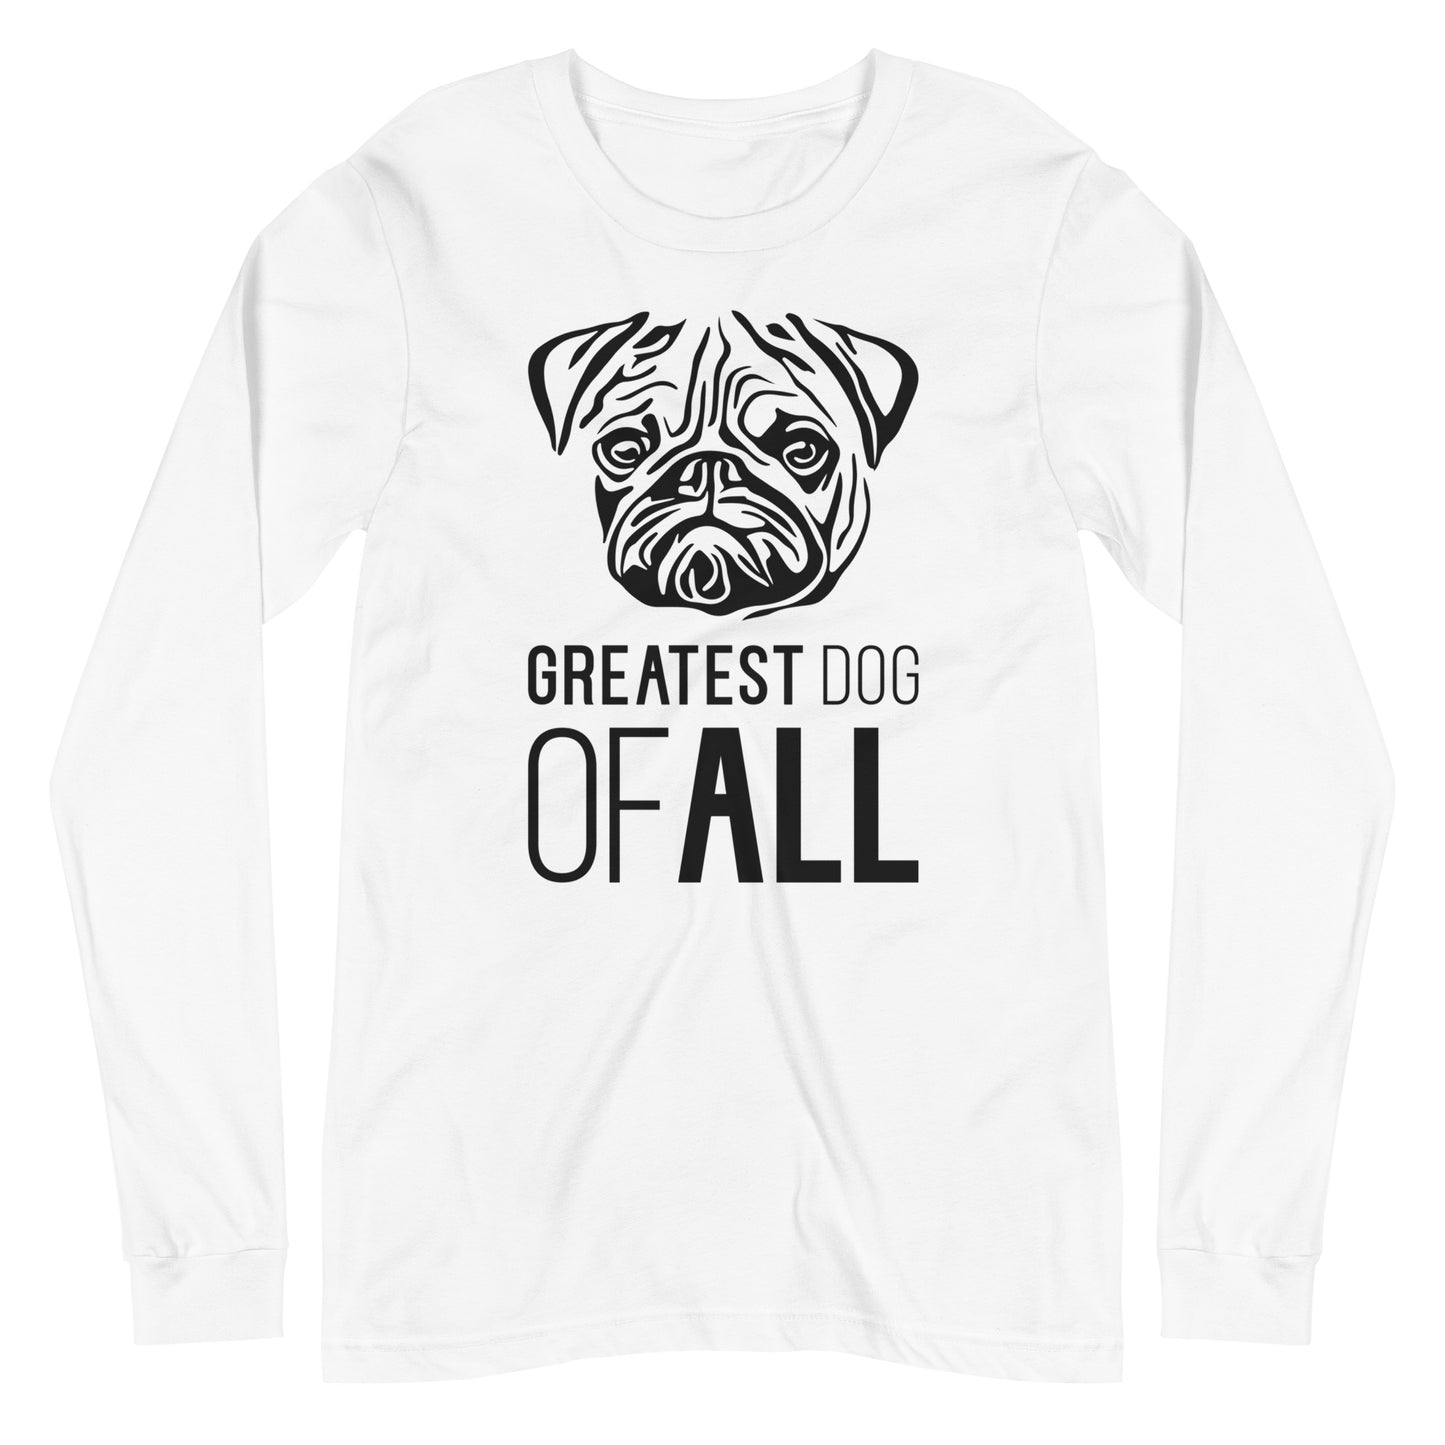 Black Pug face silhouette with Greatest Dog of All caption on unisex white long sleeve t-shirt